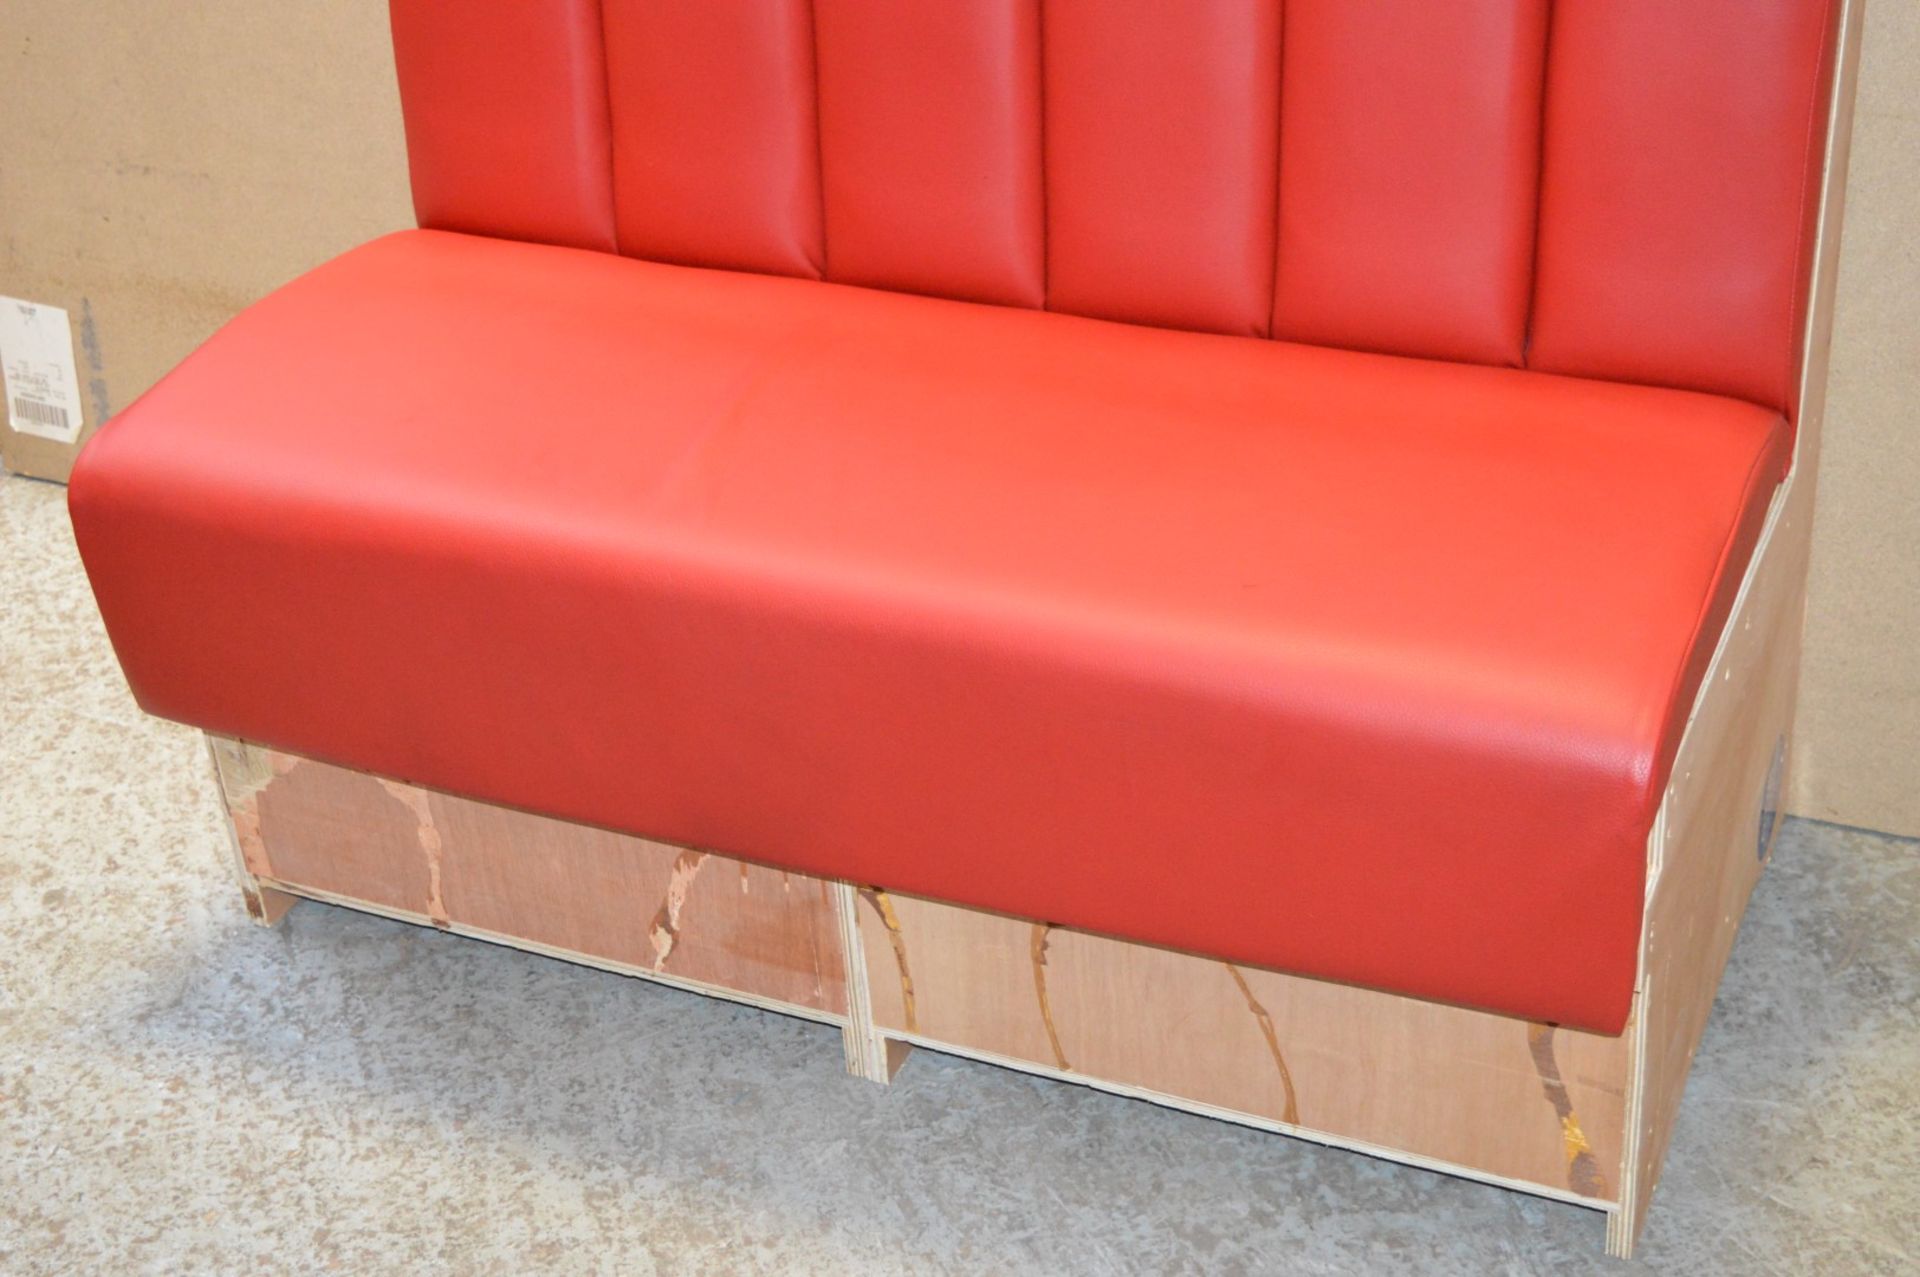 1 x High Back Single Seating Bench Upholstered in Red Leather - Sits upto Two People - High - Image 12 of 17